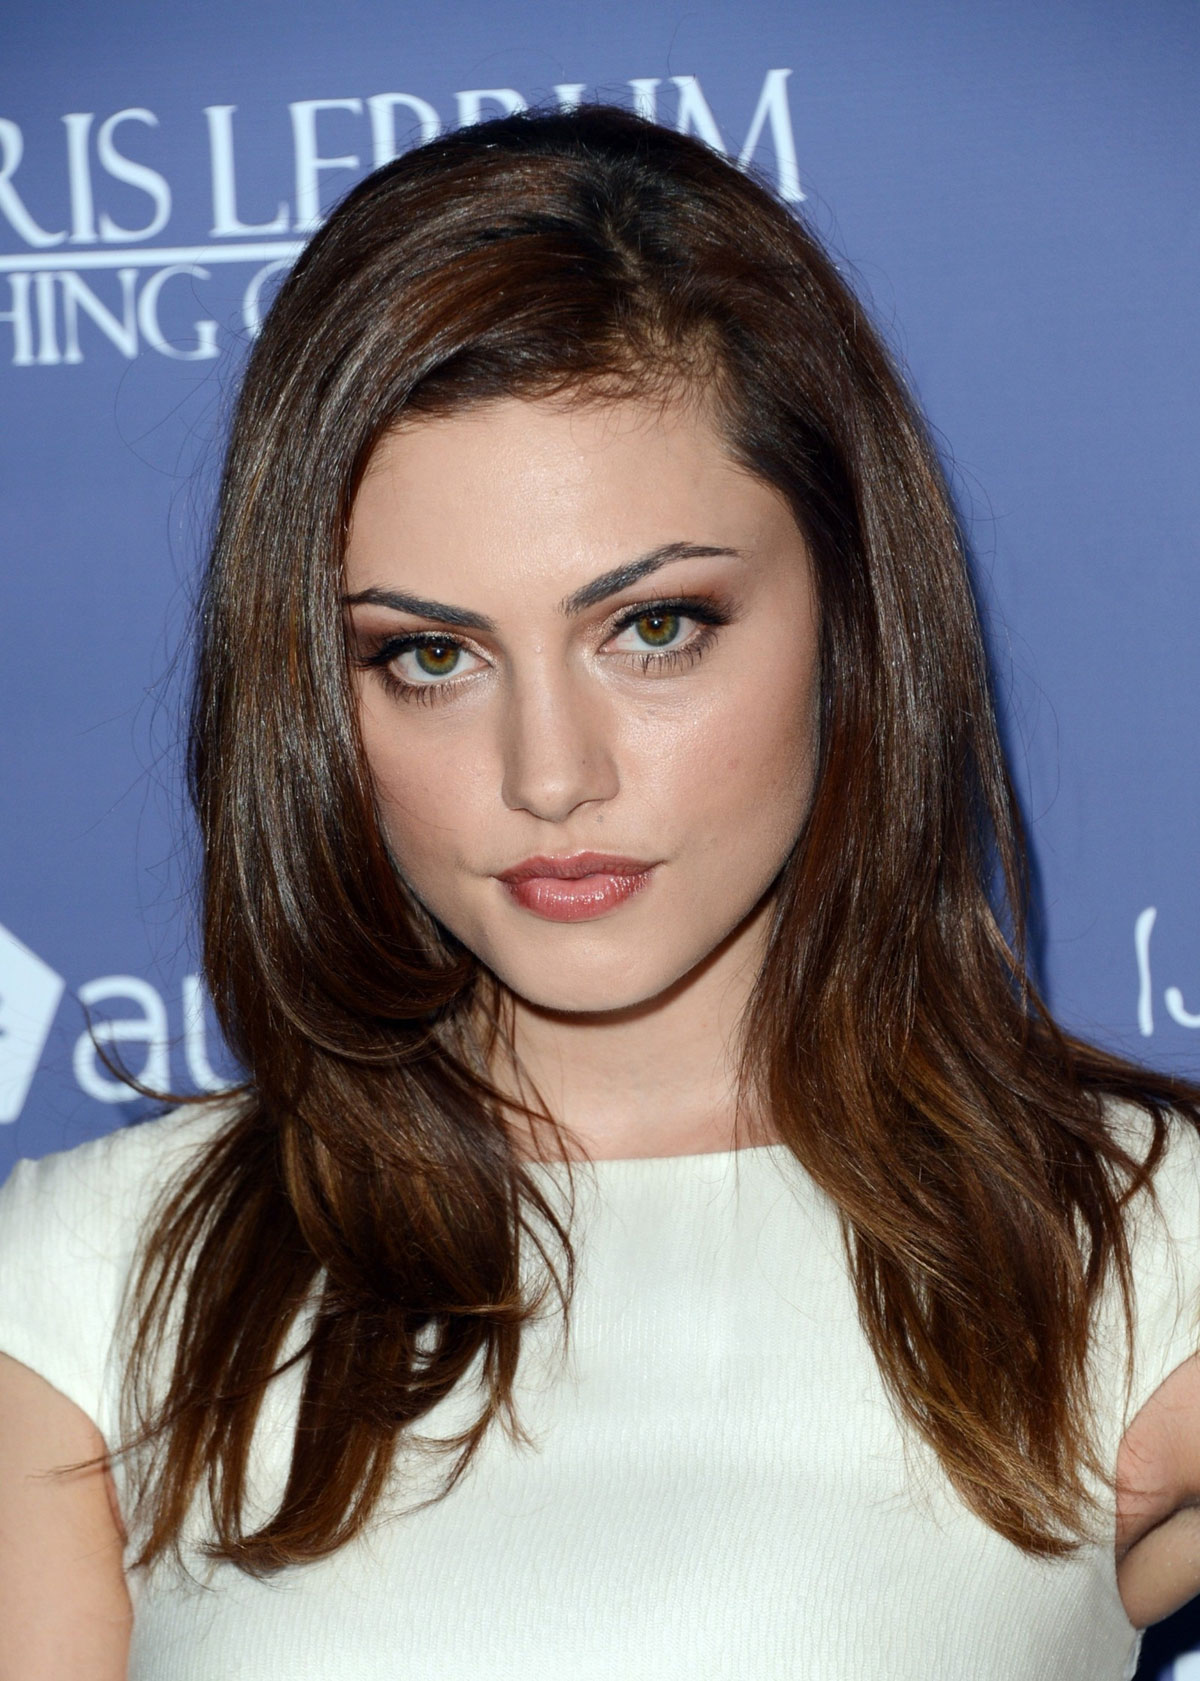 http://www.hawtcelebs.com/wp-content/uploads/2012/06/PHOEBE-TONKIN-at-Australians-In-Film-Awards-and-Benefit-Dinner-in-Century-City-1.jpg